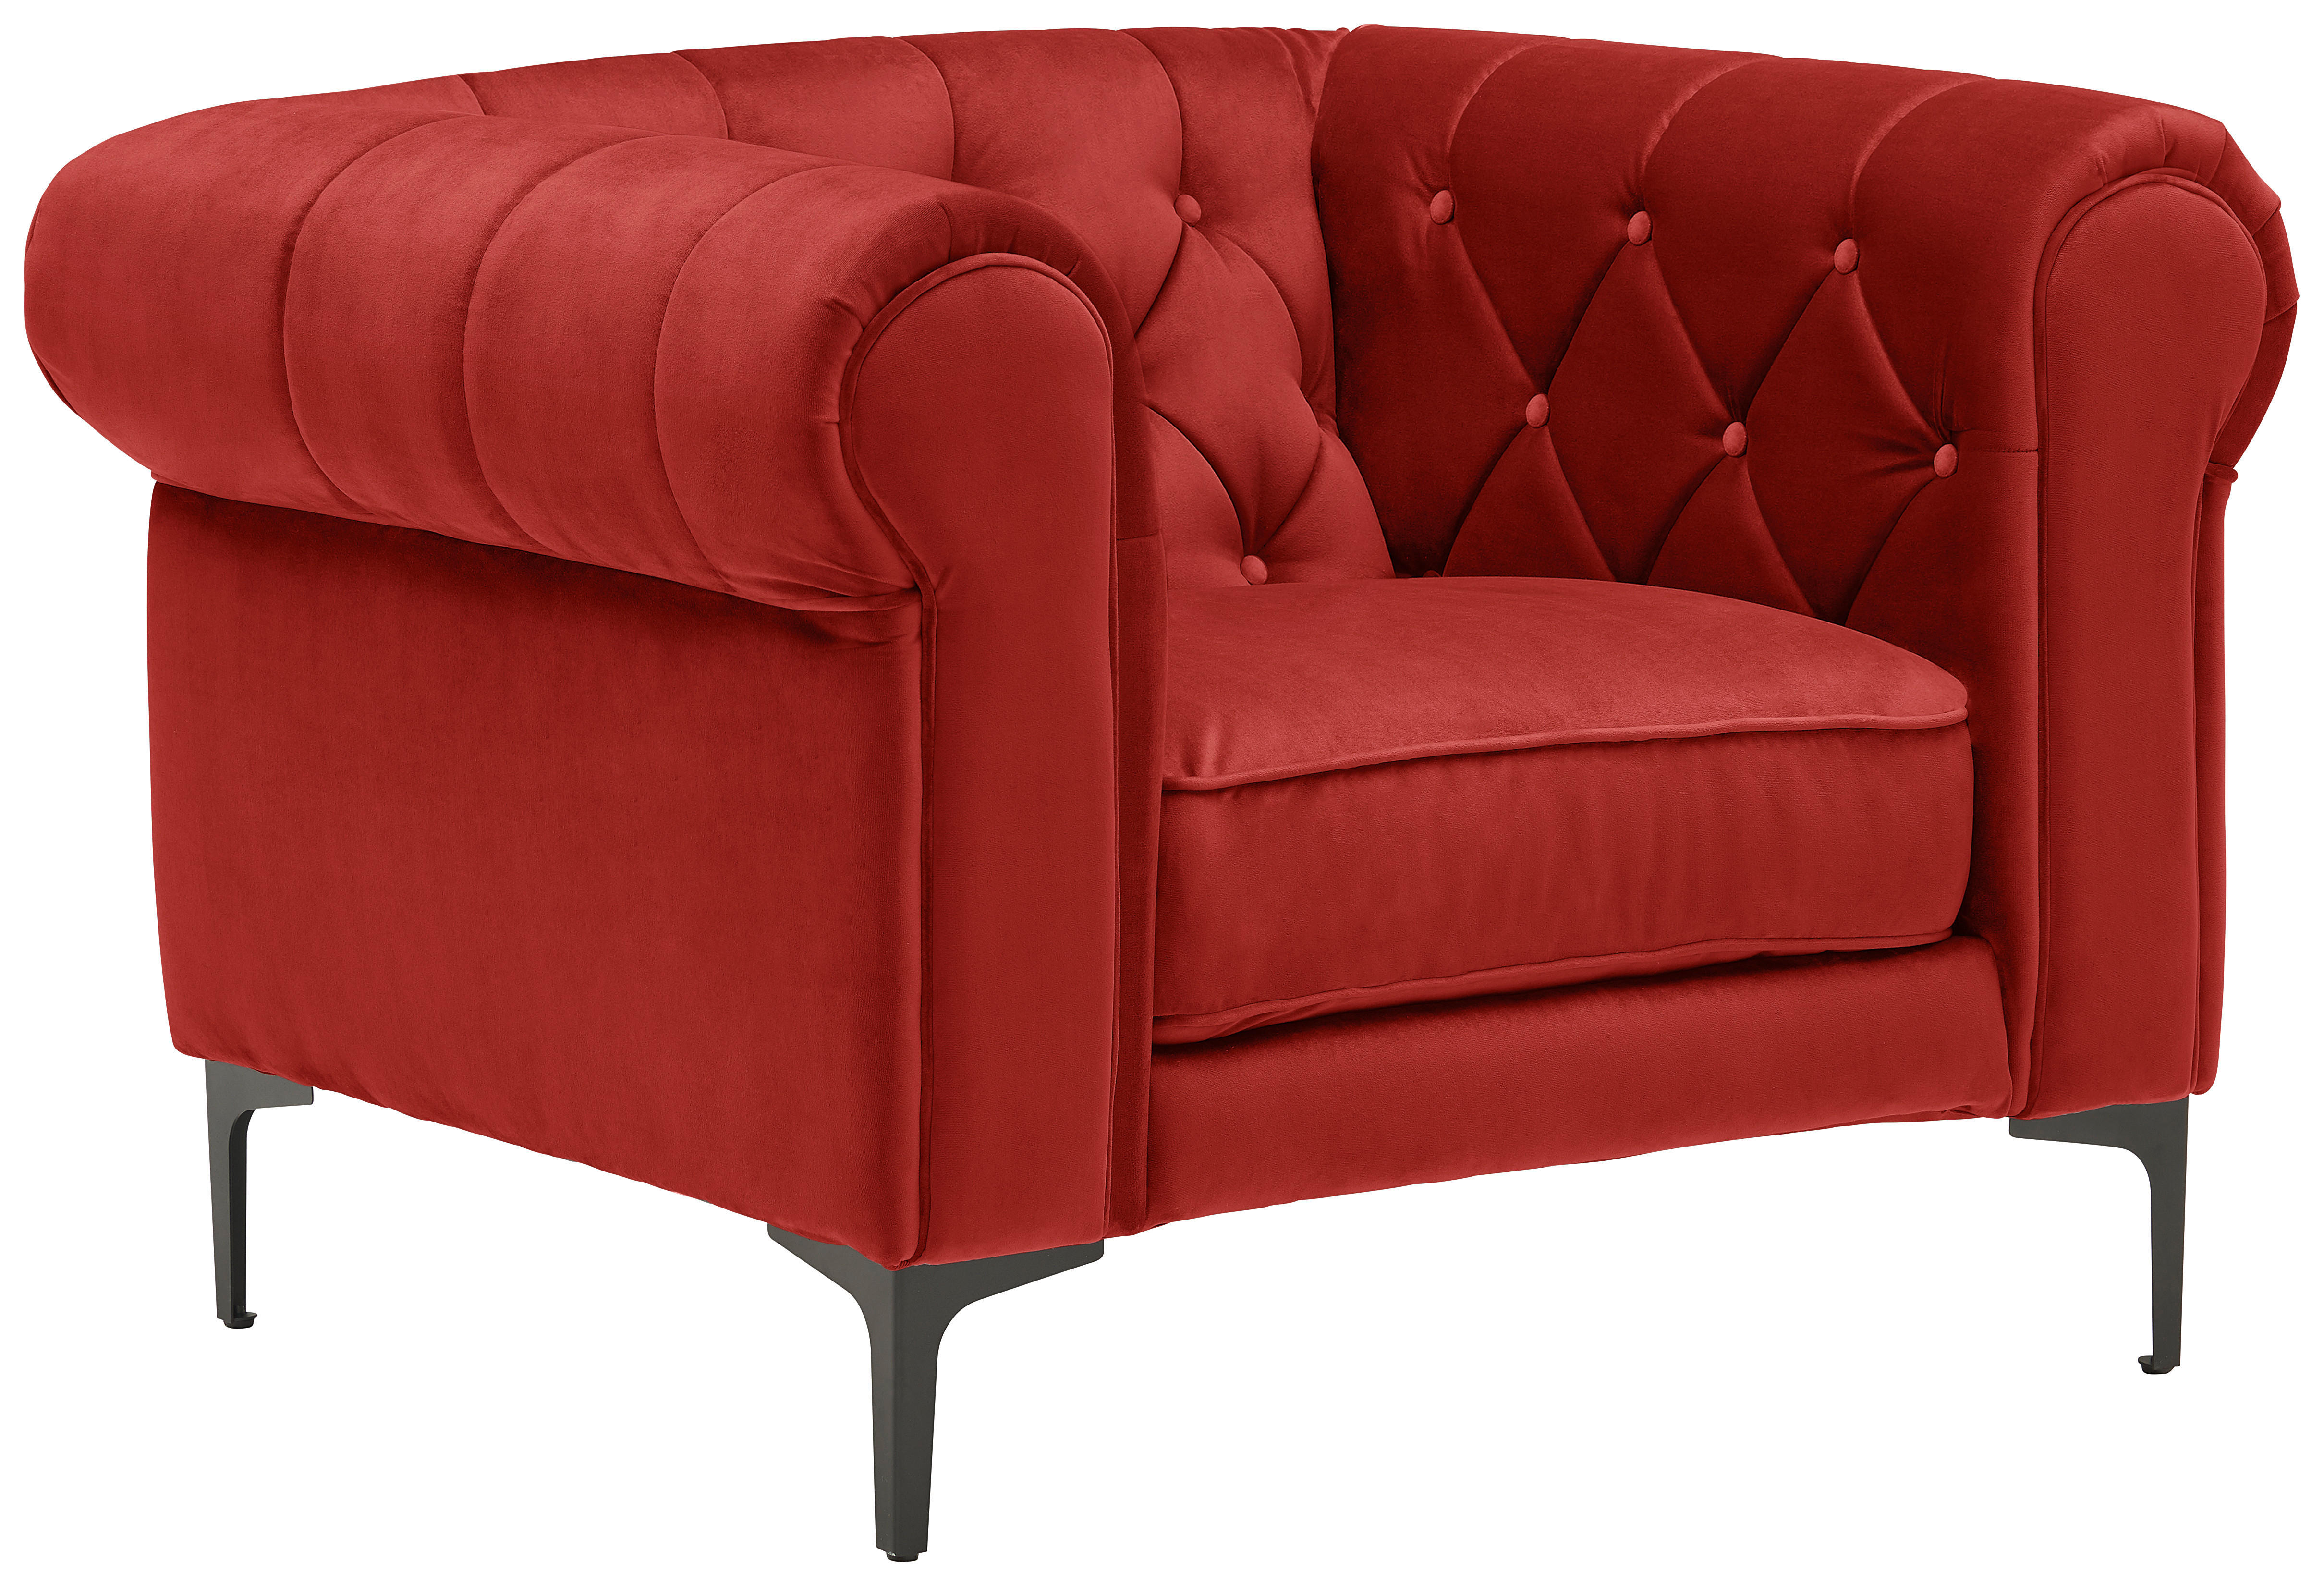 CHESTERFIELD-SESSEL Samt Rot  - Rot/Schwarz, Trend, Textil/Metall (105/75/90cm) - Carryhome